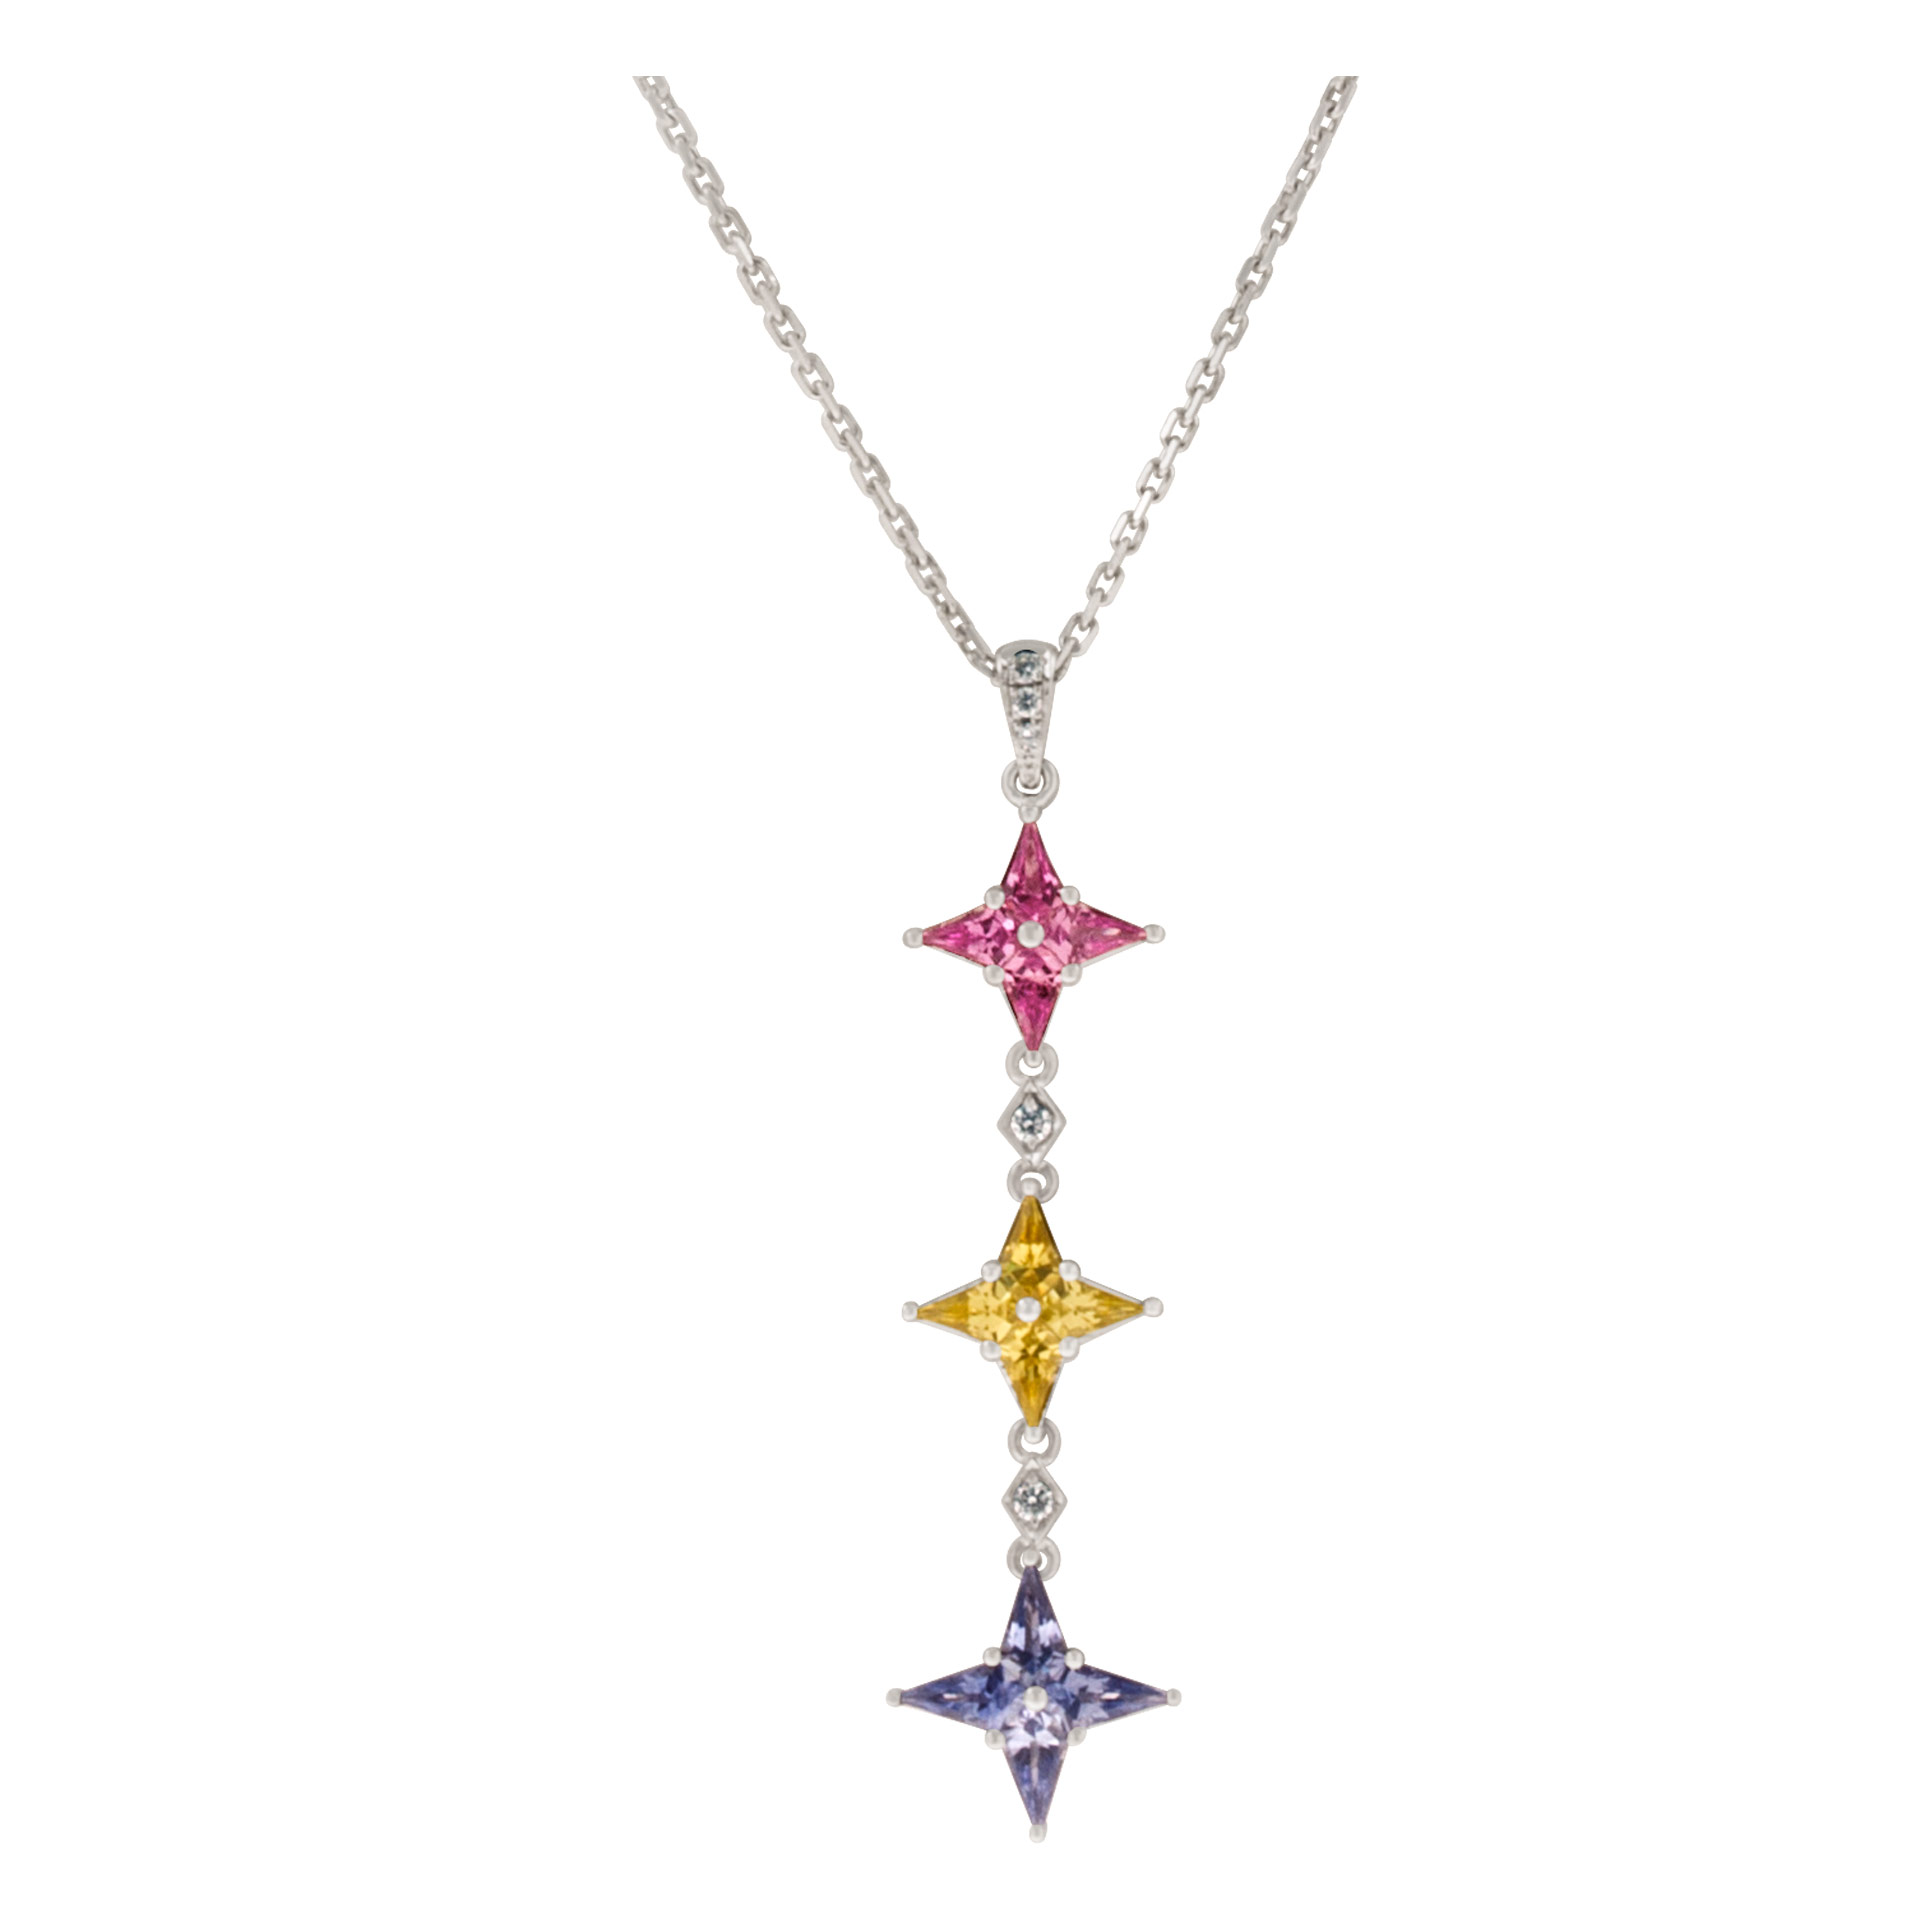 Drop sapphire star pendant/necklace in 18k white gold. 1.93cts in sapphires